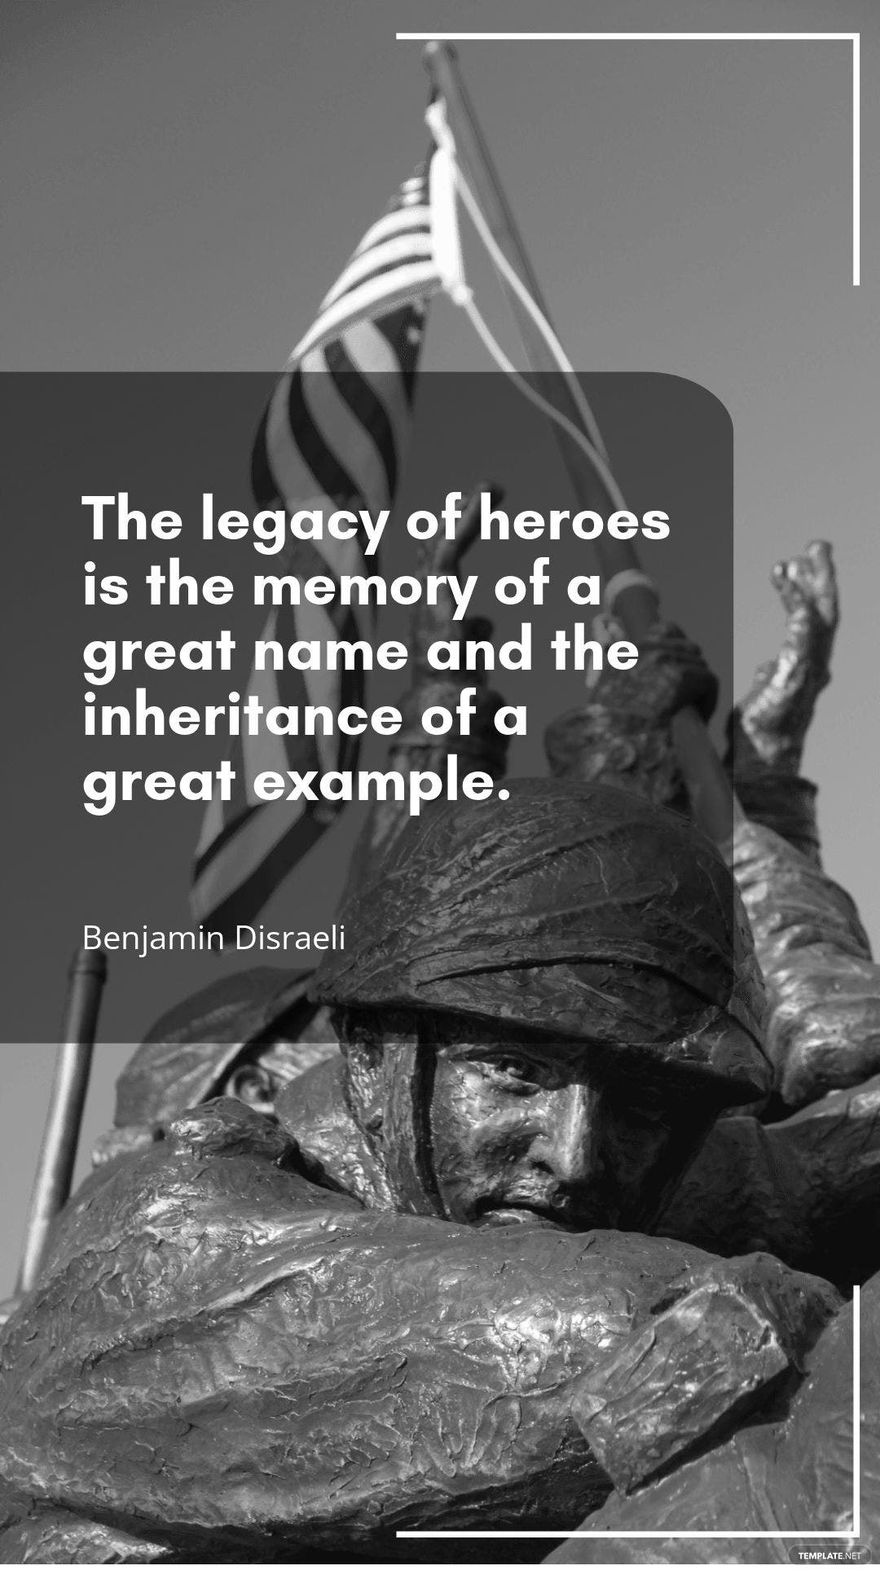 Benjamin Disraeli - The legacy of heroes is the memory of a great name and the inheritance of a great example. in JPG